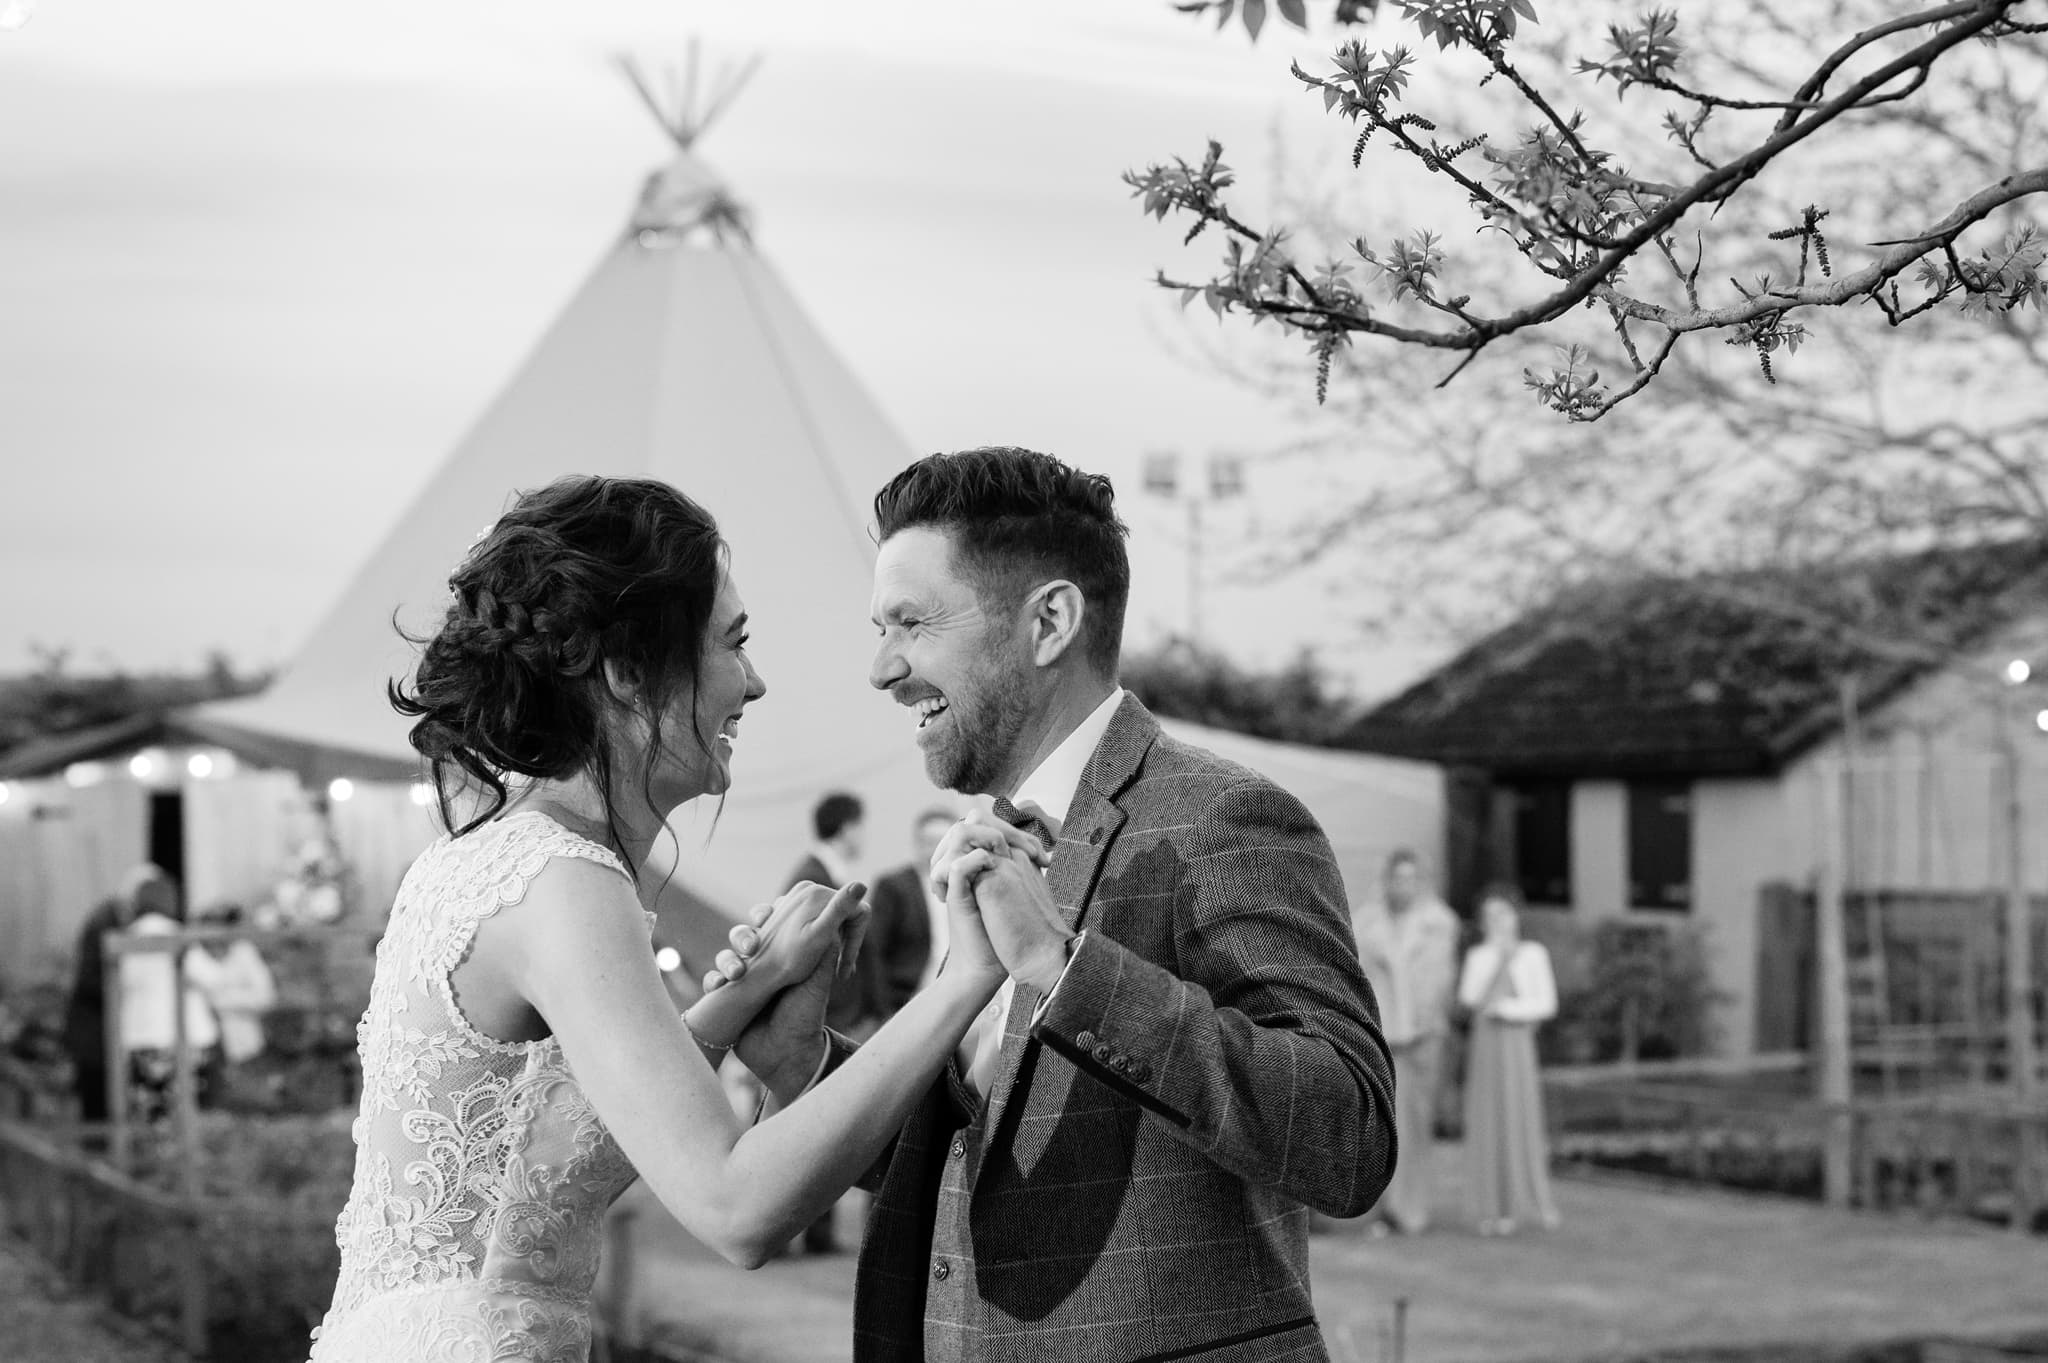 Outdoor first dance in front of a tipi